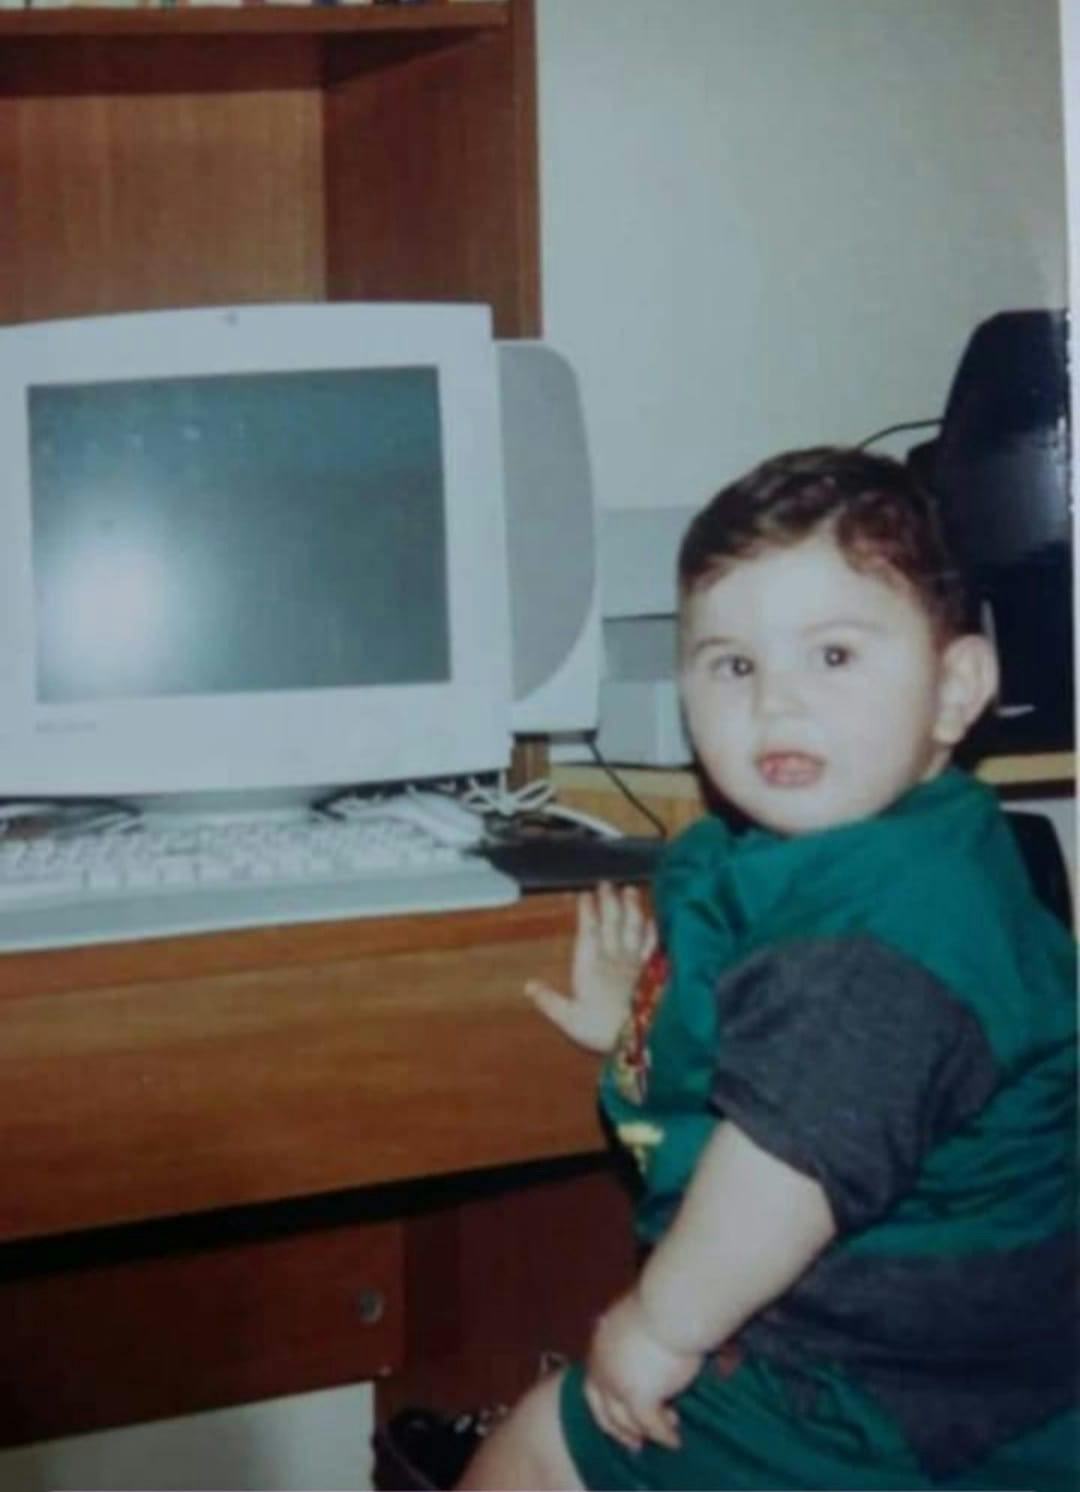 Toddler Hicham ElMir Sitting in front of his father's computer